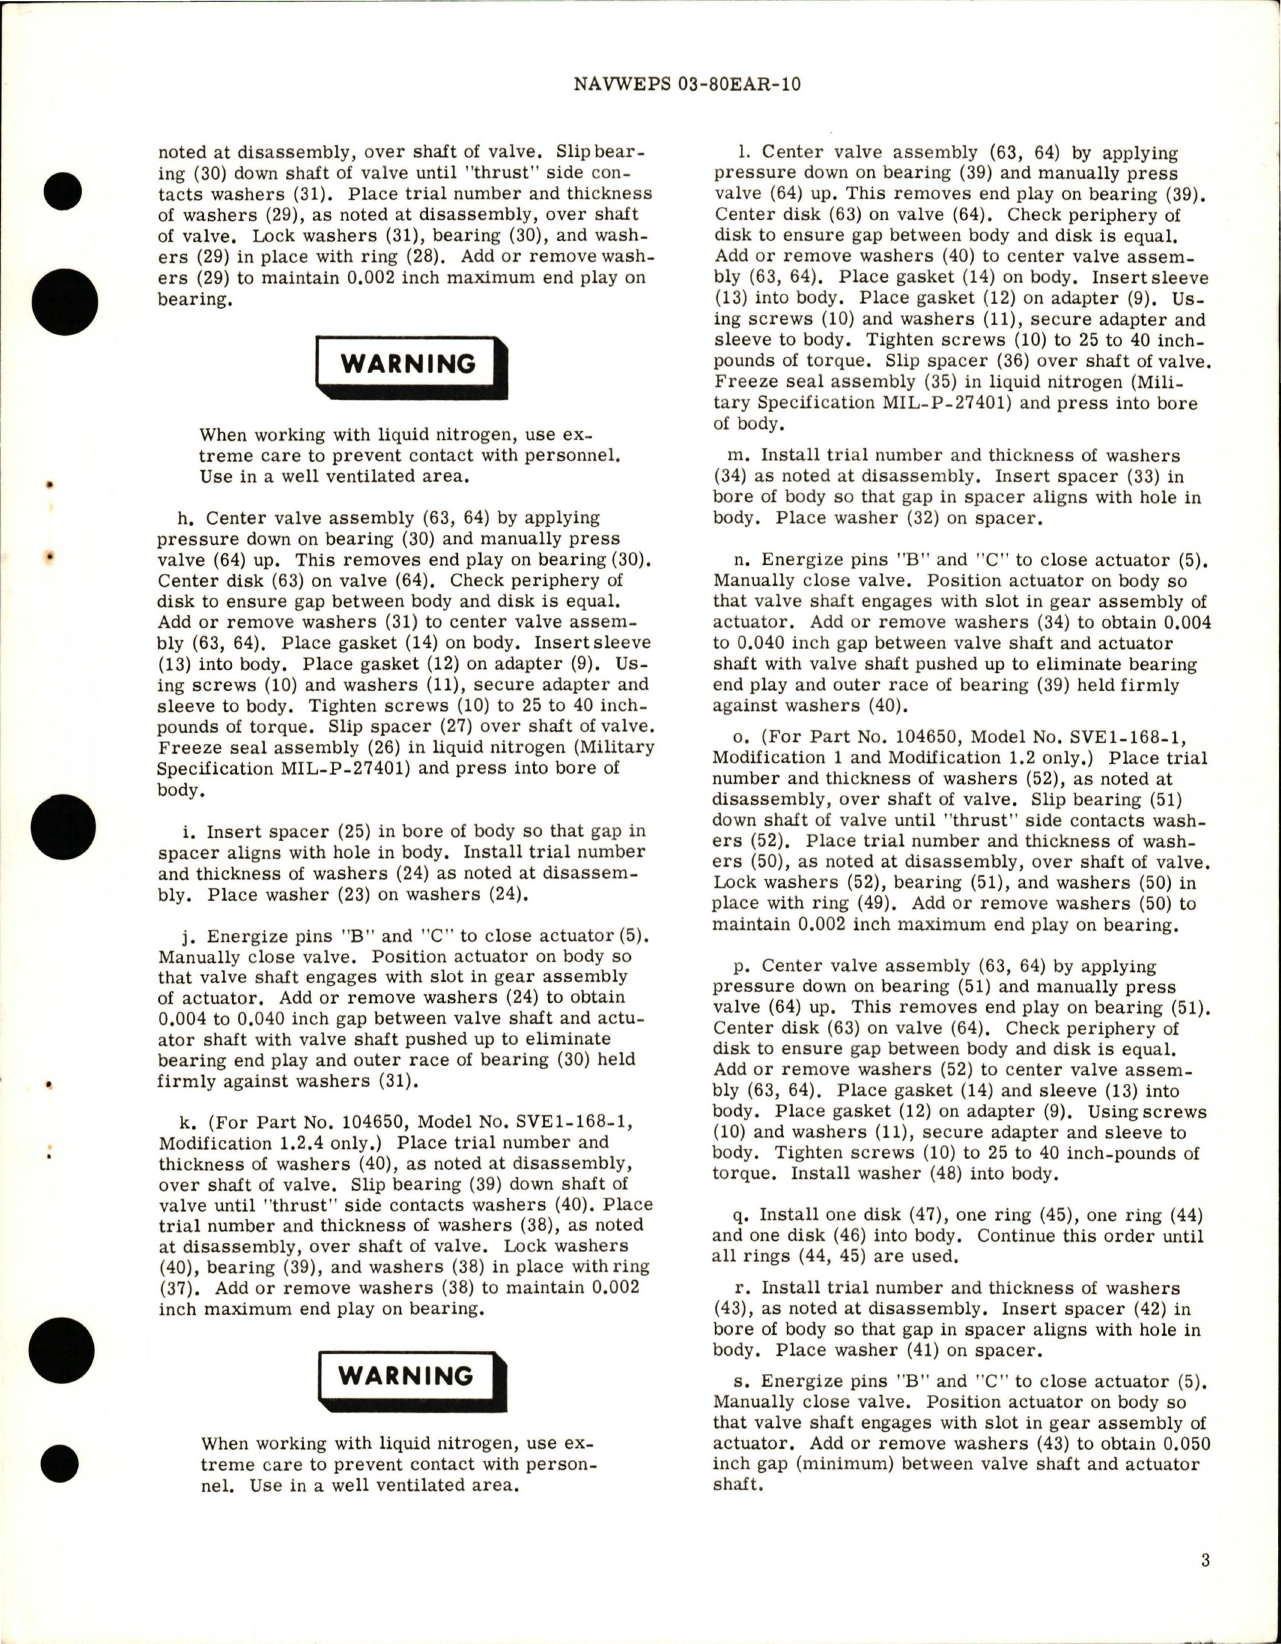 Sample page 5 from AirCorps Library document: Overhaul Instructions with Parts Breakdown for One and One-Half Inch Diameter Electric Shutoff Butterfly Valve - Part 104650